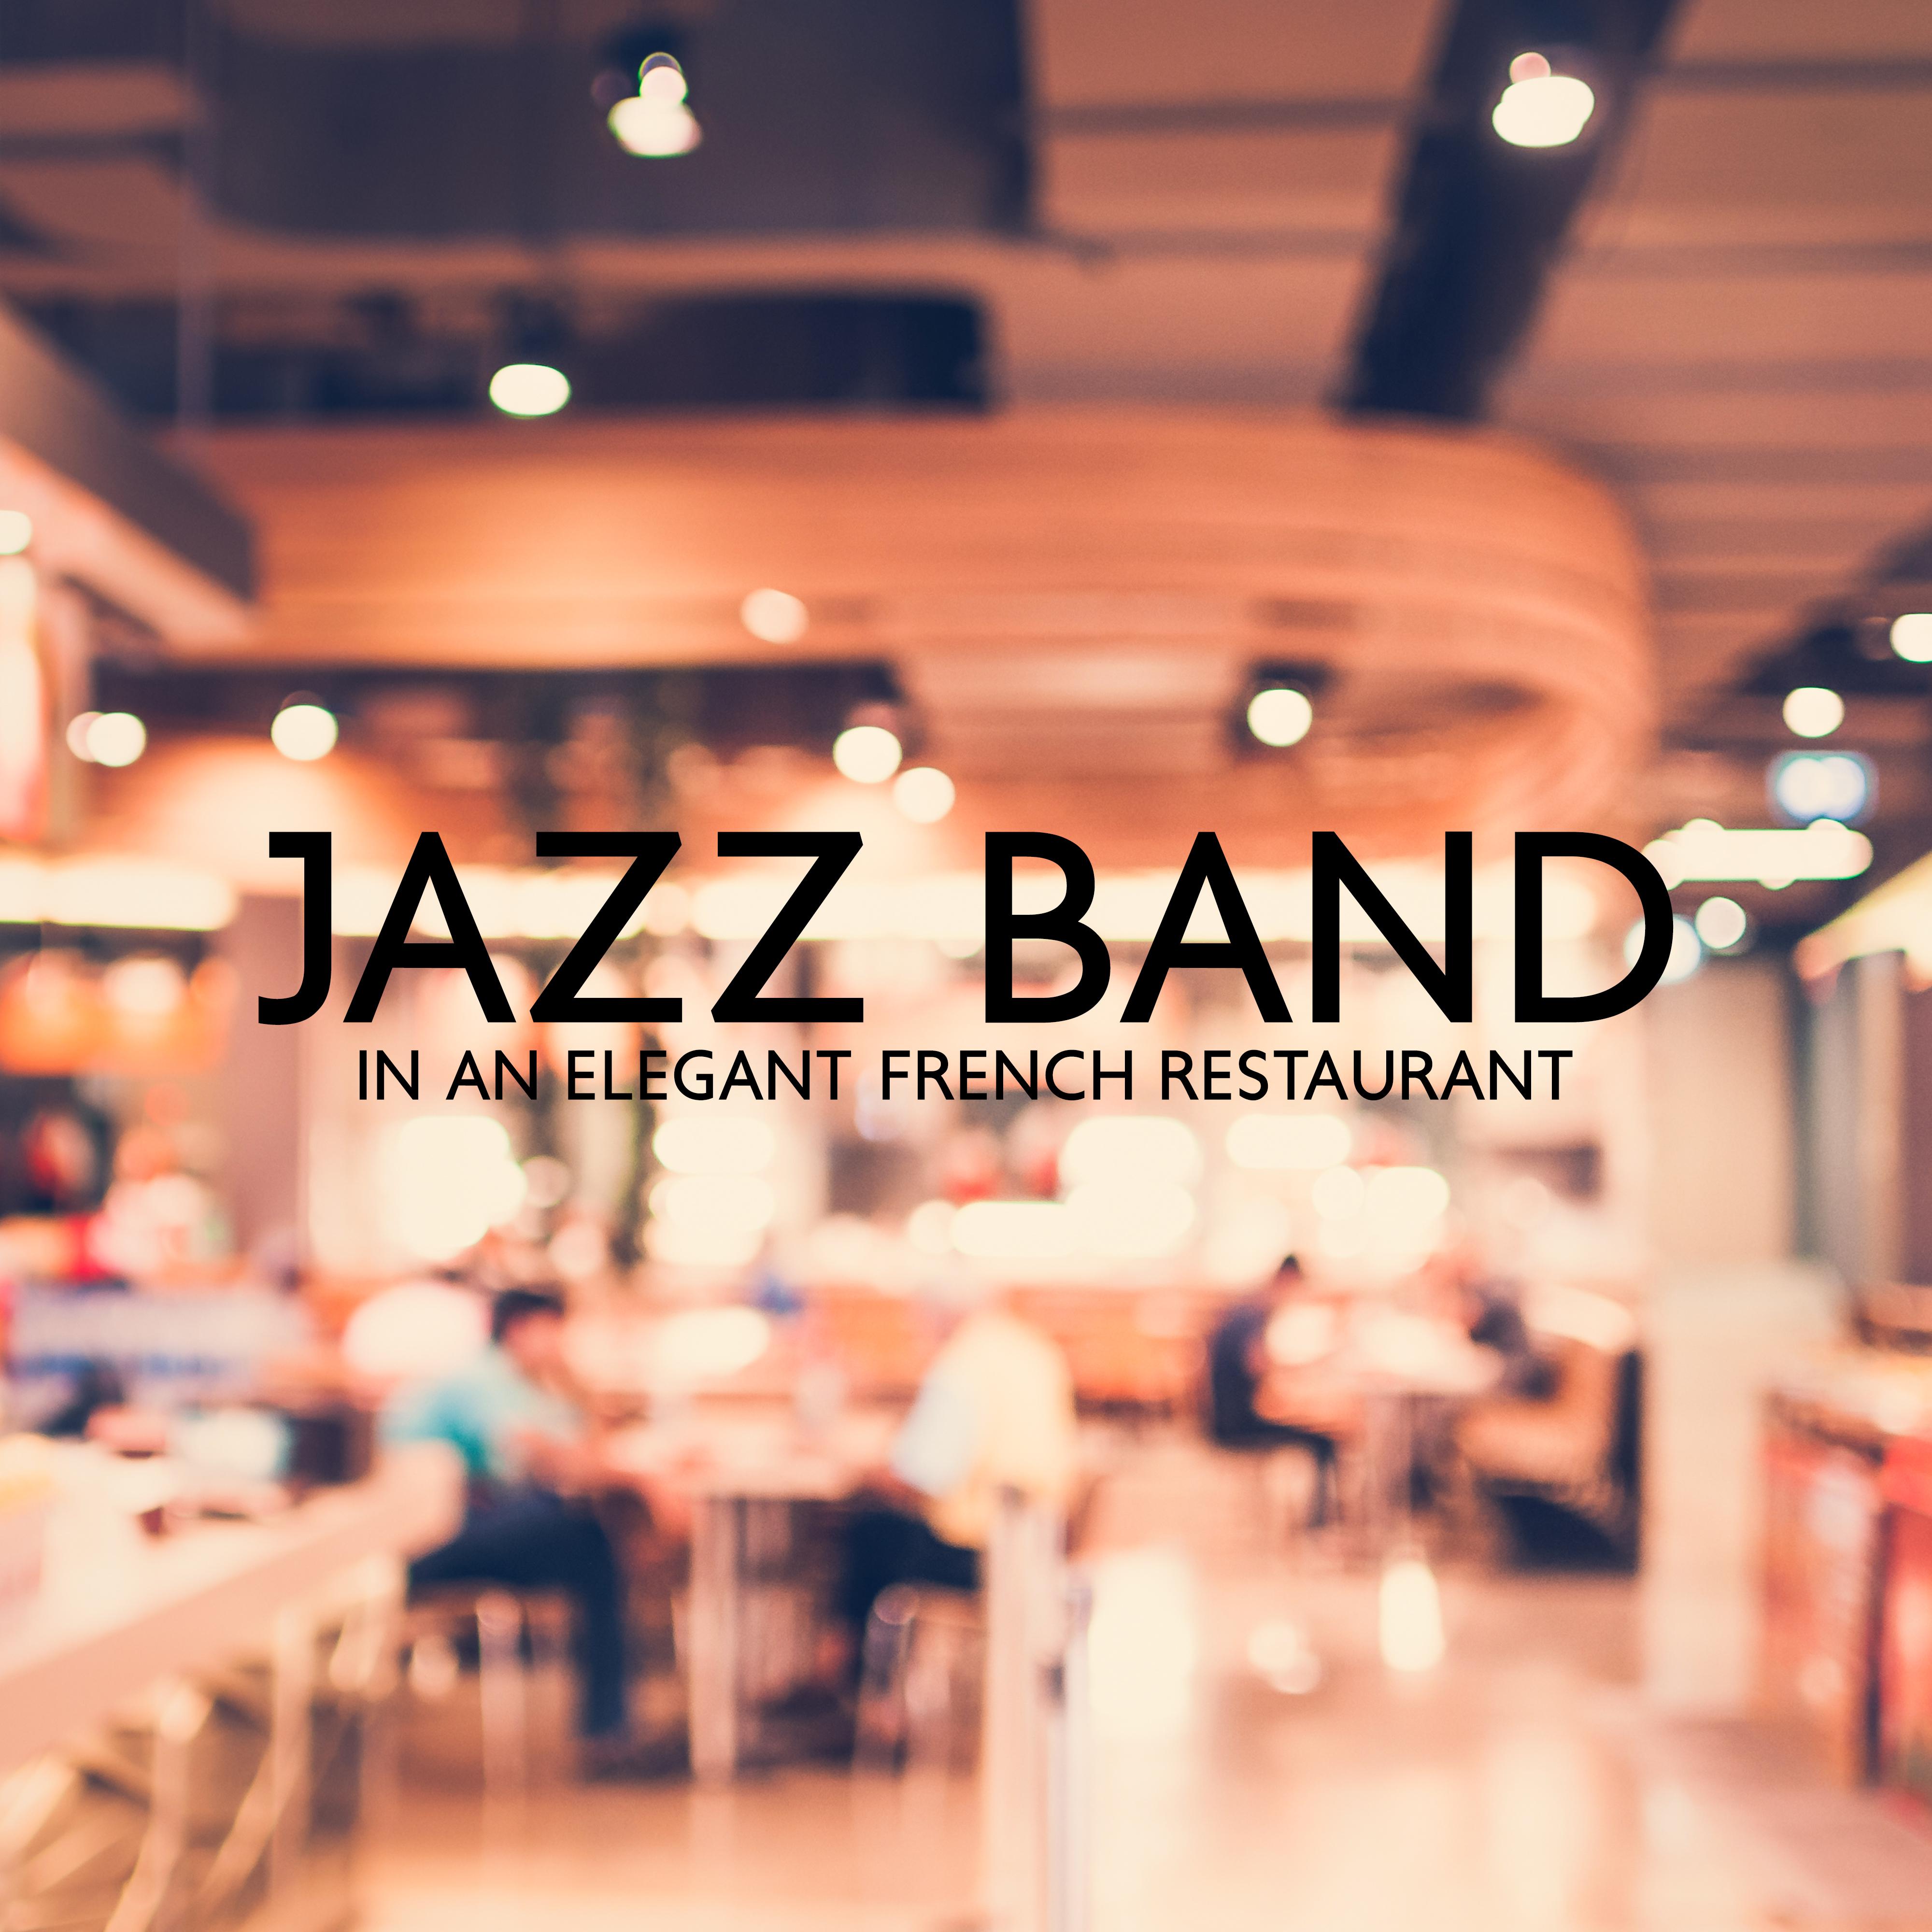 Jazz Band in an Elegant French Restaurant: 2019 Smooth Jazz Songs for Dinner Nice Time Spending with Friends